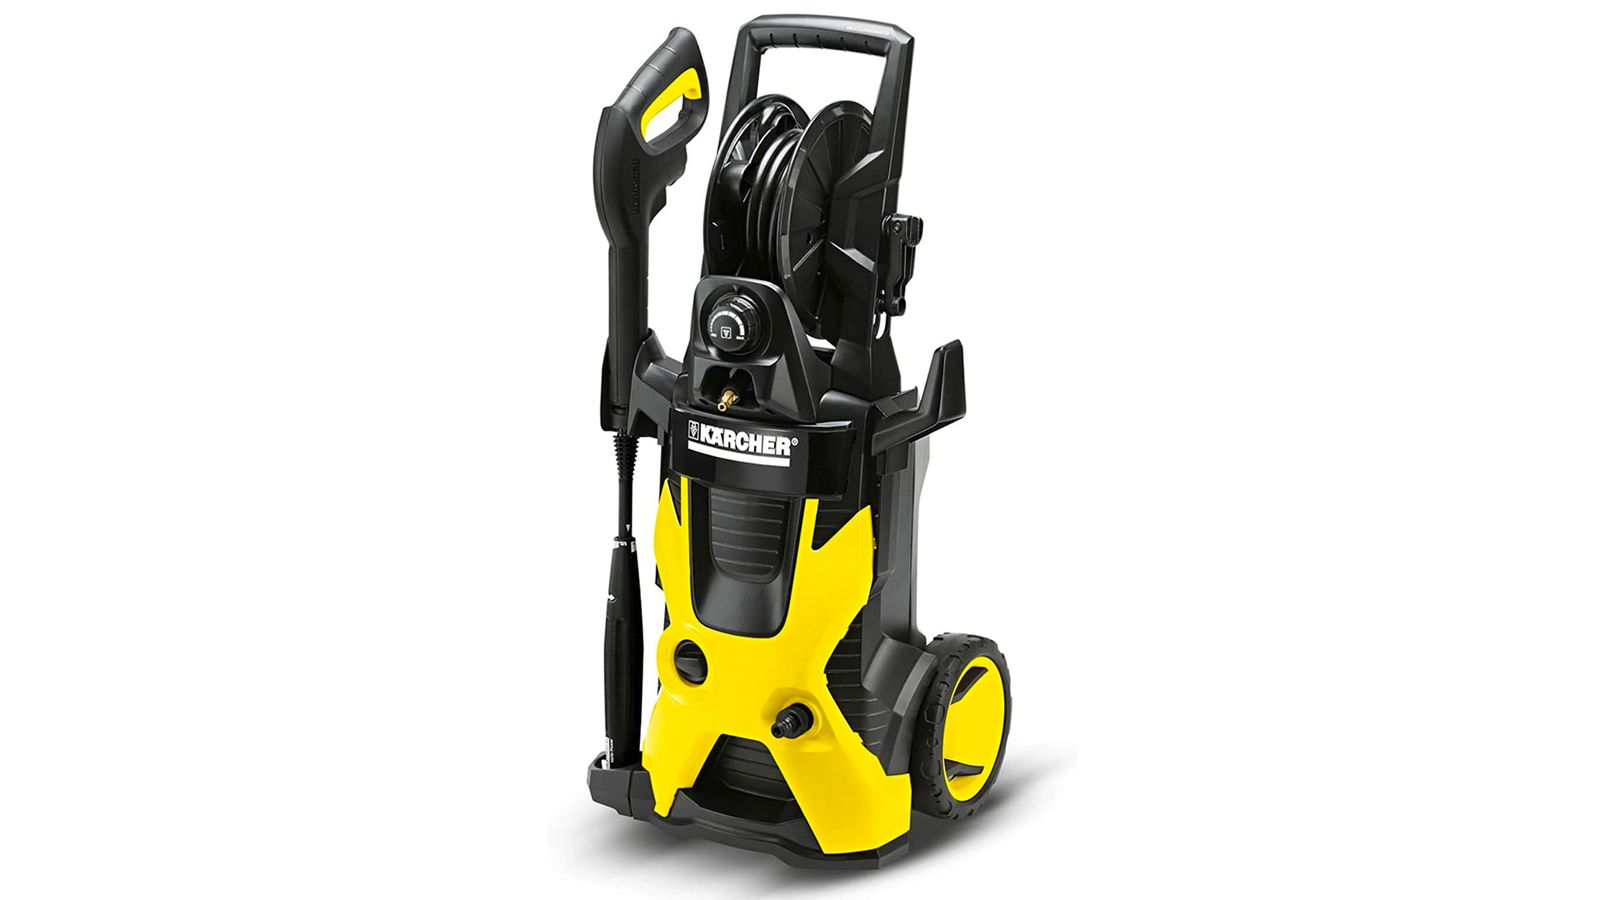 Karcher K5 Premium Pressure Washer product image of a yellow and black machine.